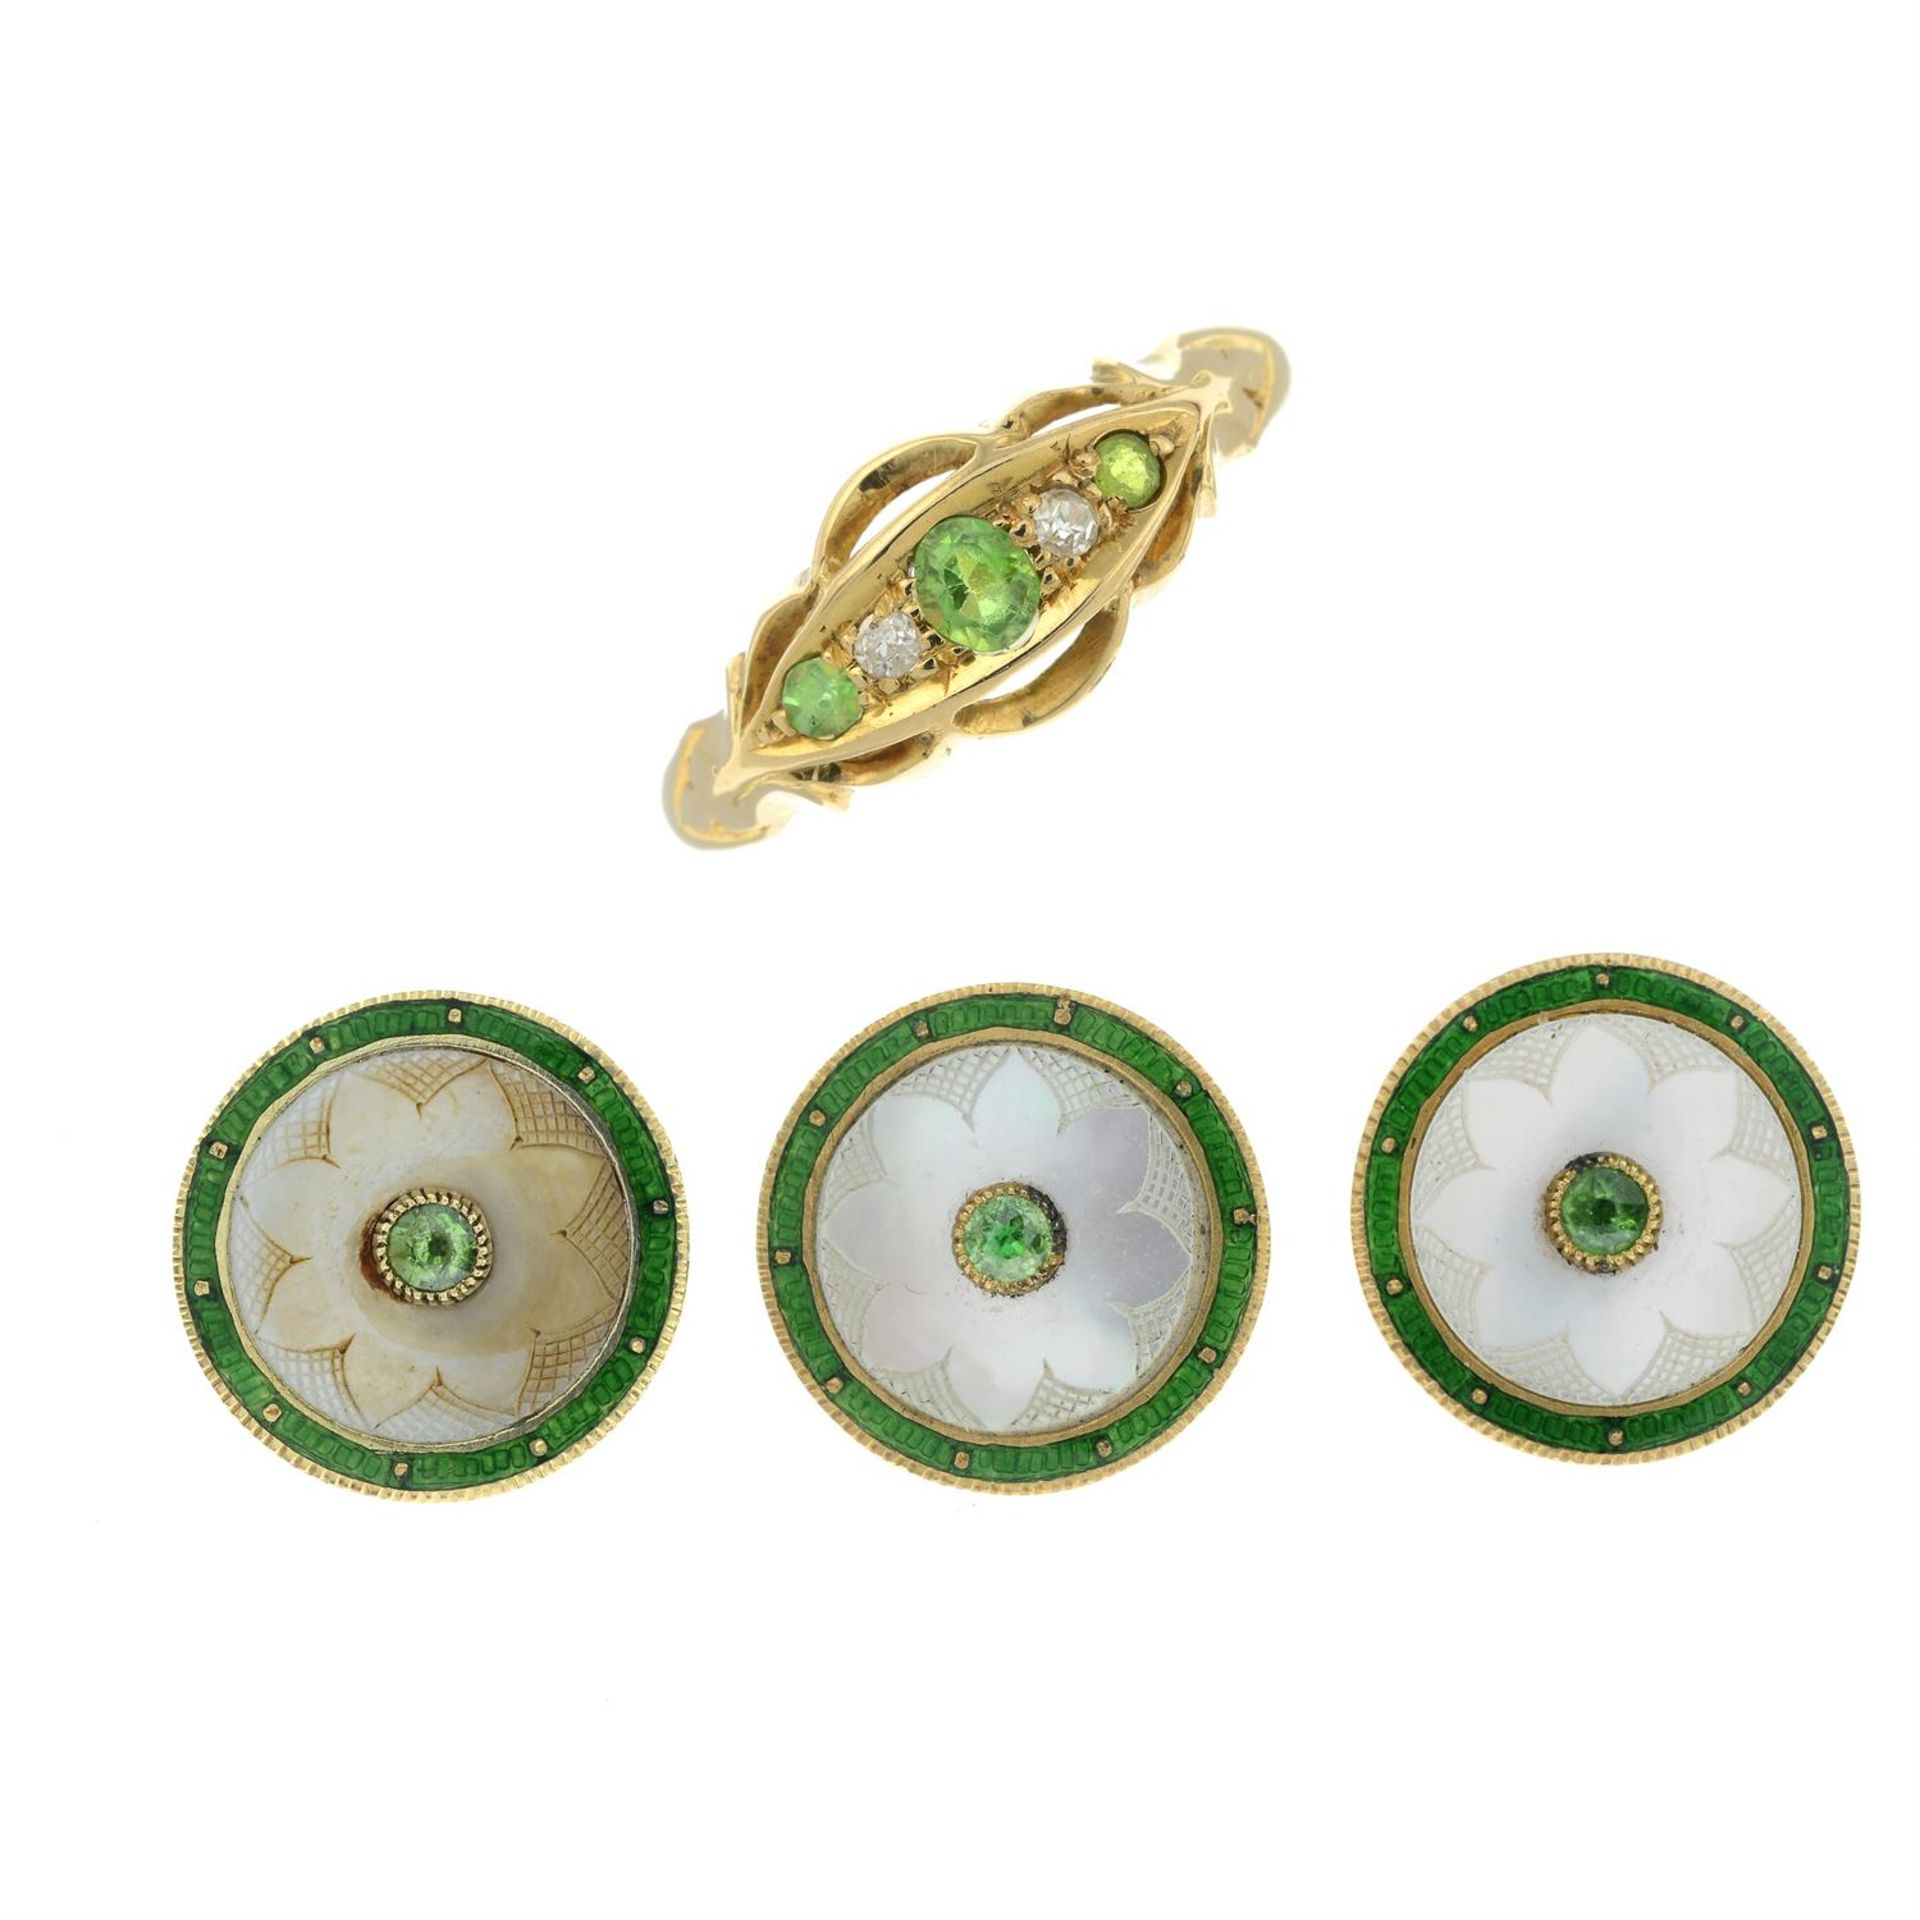 An early 20th century 18ct gold demantoid garnet and diamond ring, together with a set of three - Image 2 of 5